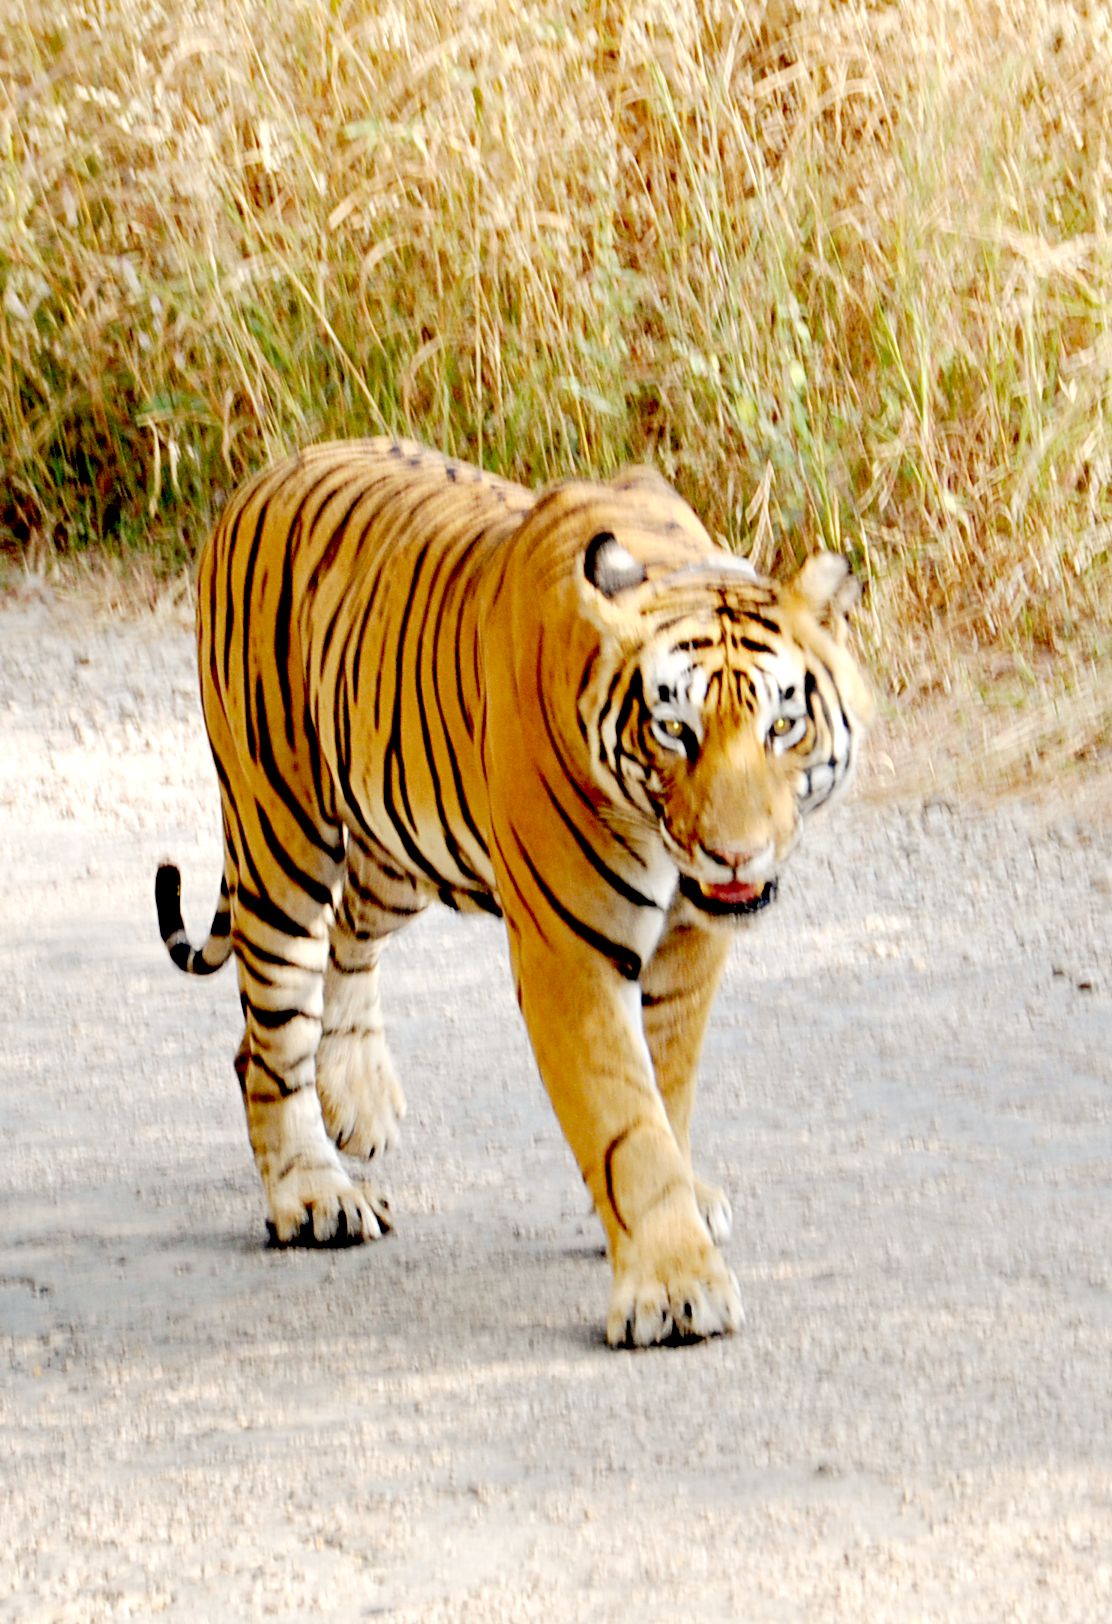 Monitoring of tigers will now be done day and night in Sariska